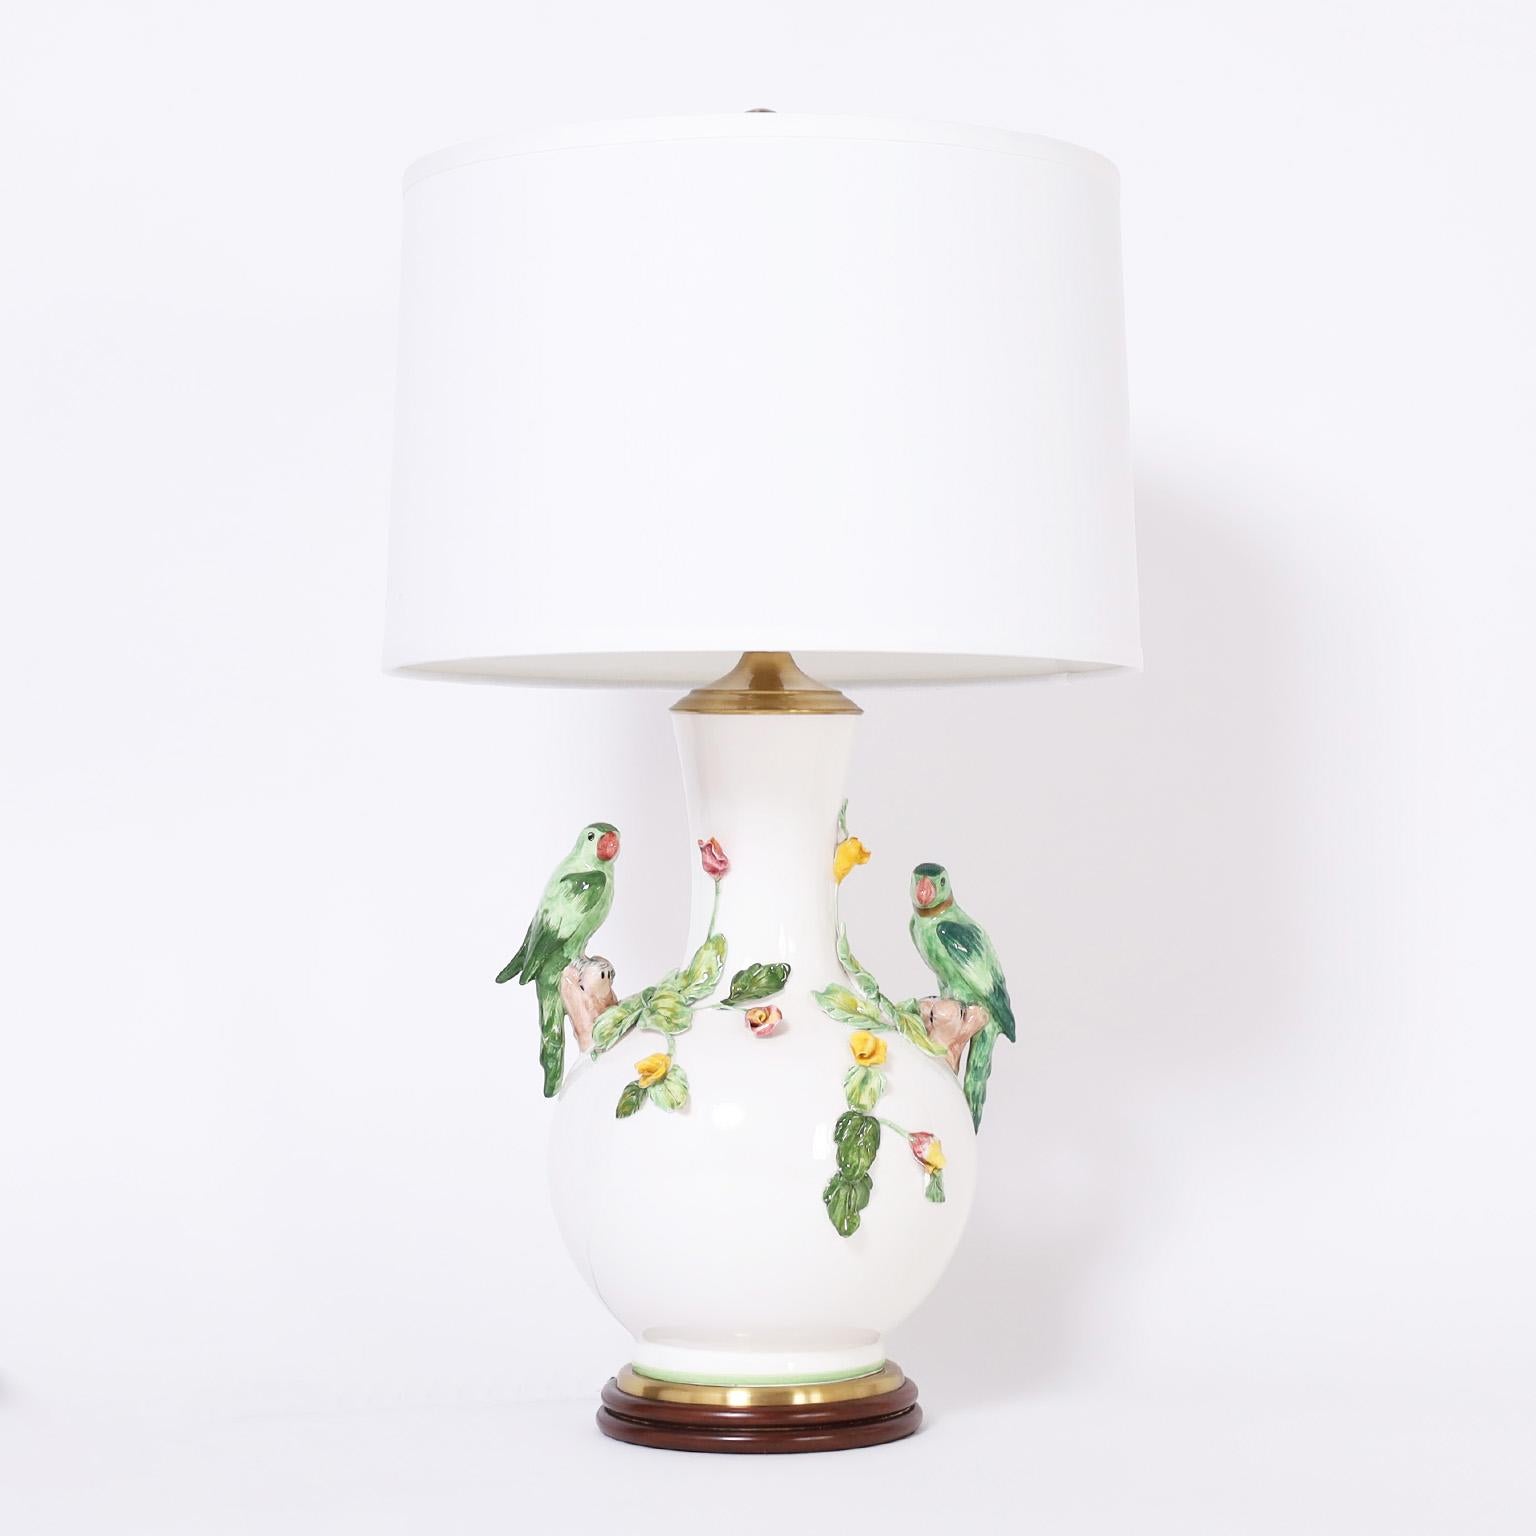 Charming pair of porcelain table lamps decorated with tropical colored parrots and flowers against a blanc de chine background. Signed Wildwood on the sockets and presented on turned mahogany bases.